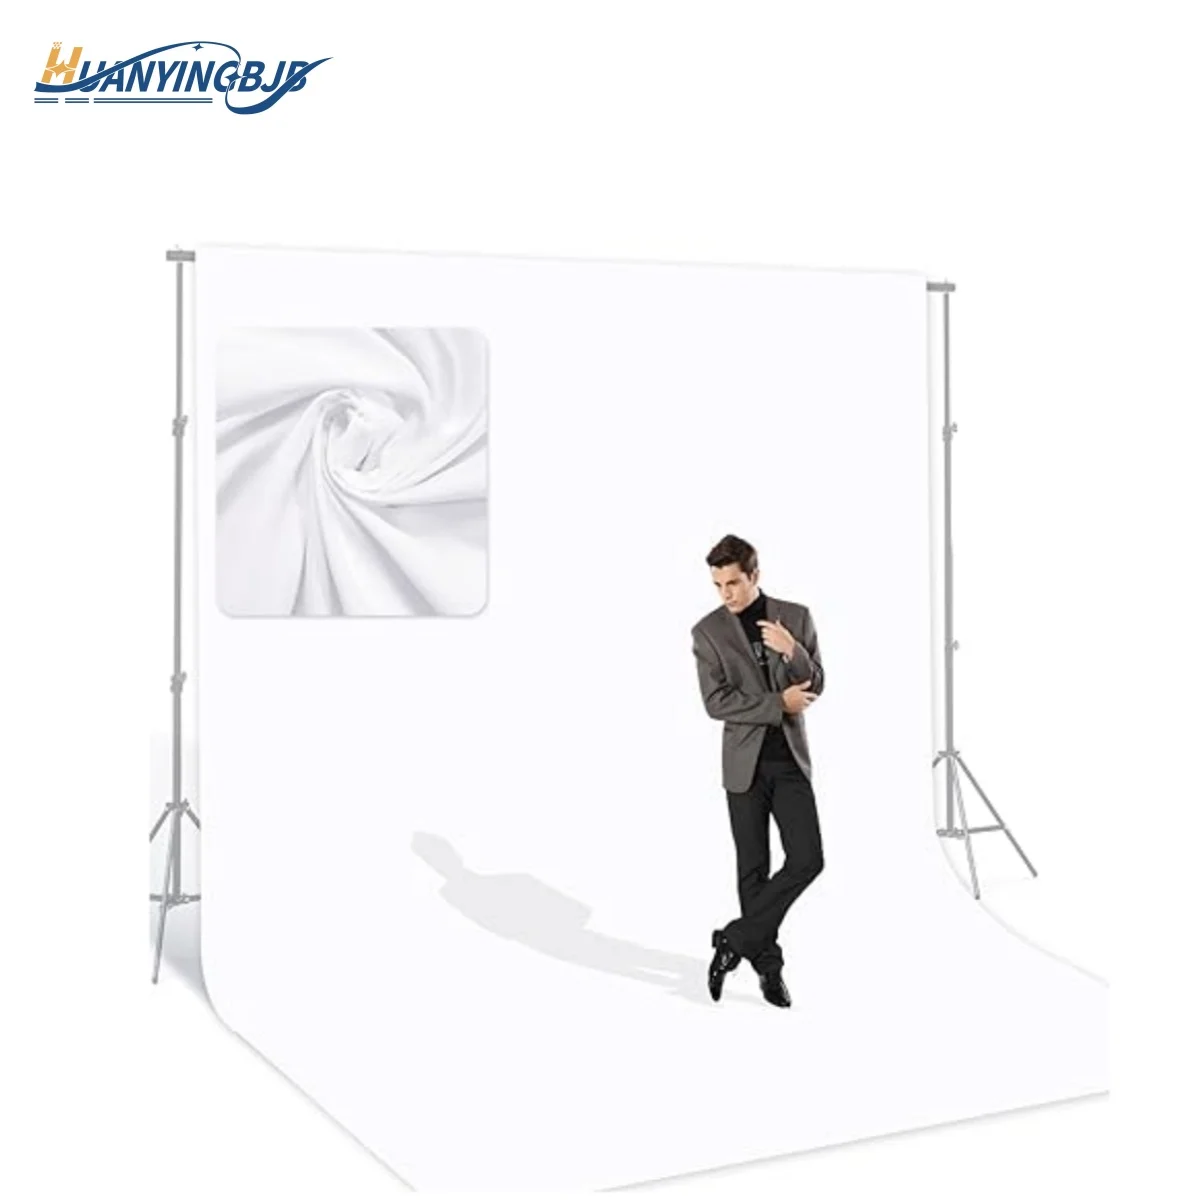 

White Solid Color Backdrop Screen Photographic Background Cloth Muslin Cotton Chroma key For Photo Studio Video Parties Curtain